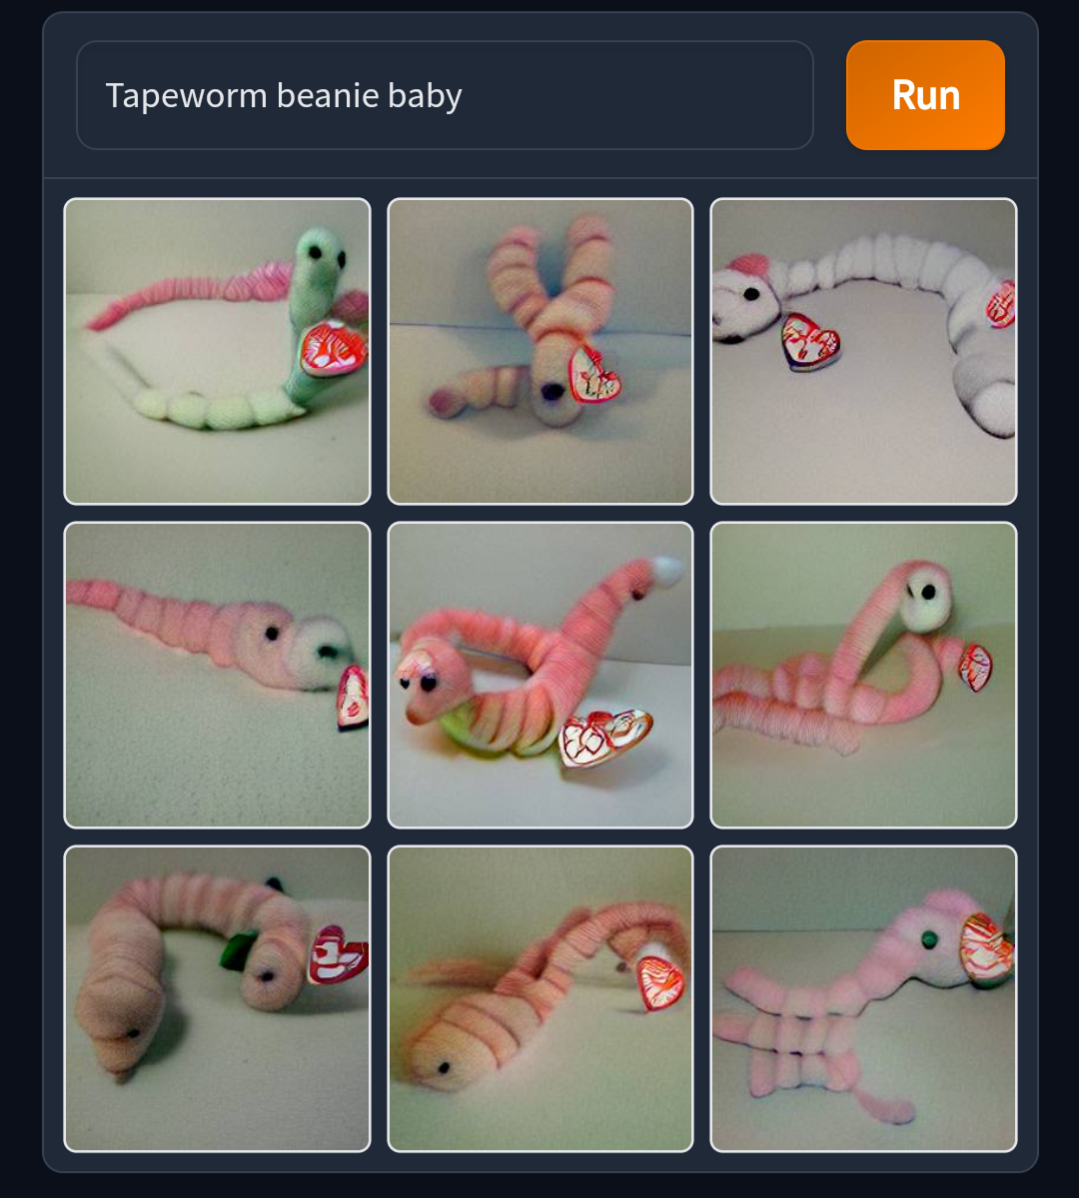 dalle_tapeworm_beanie_baby.png